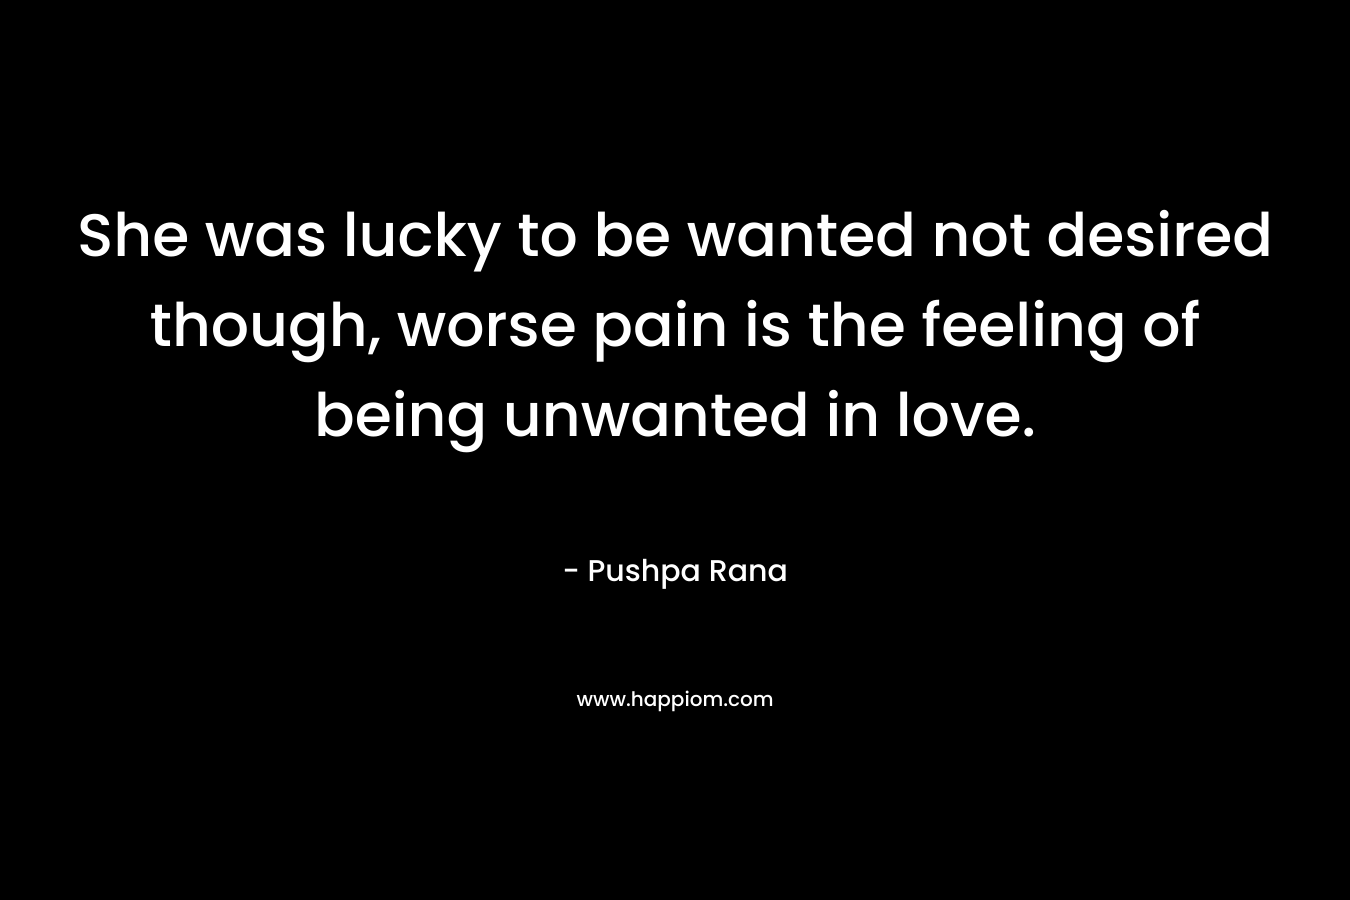 She was lucky to be wanted not desired though, worse pain is the feeling of being unwanted in love.